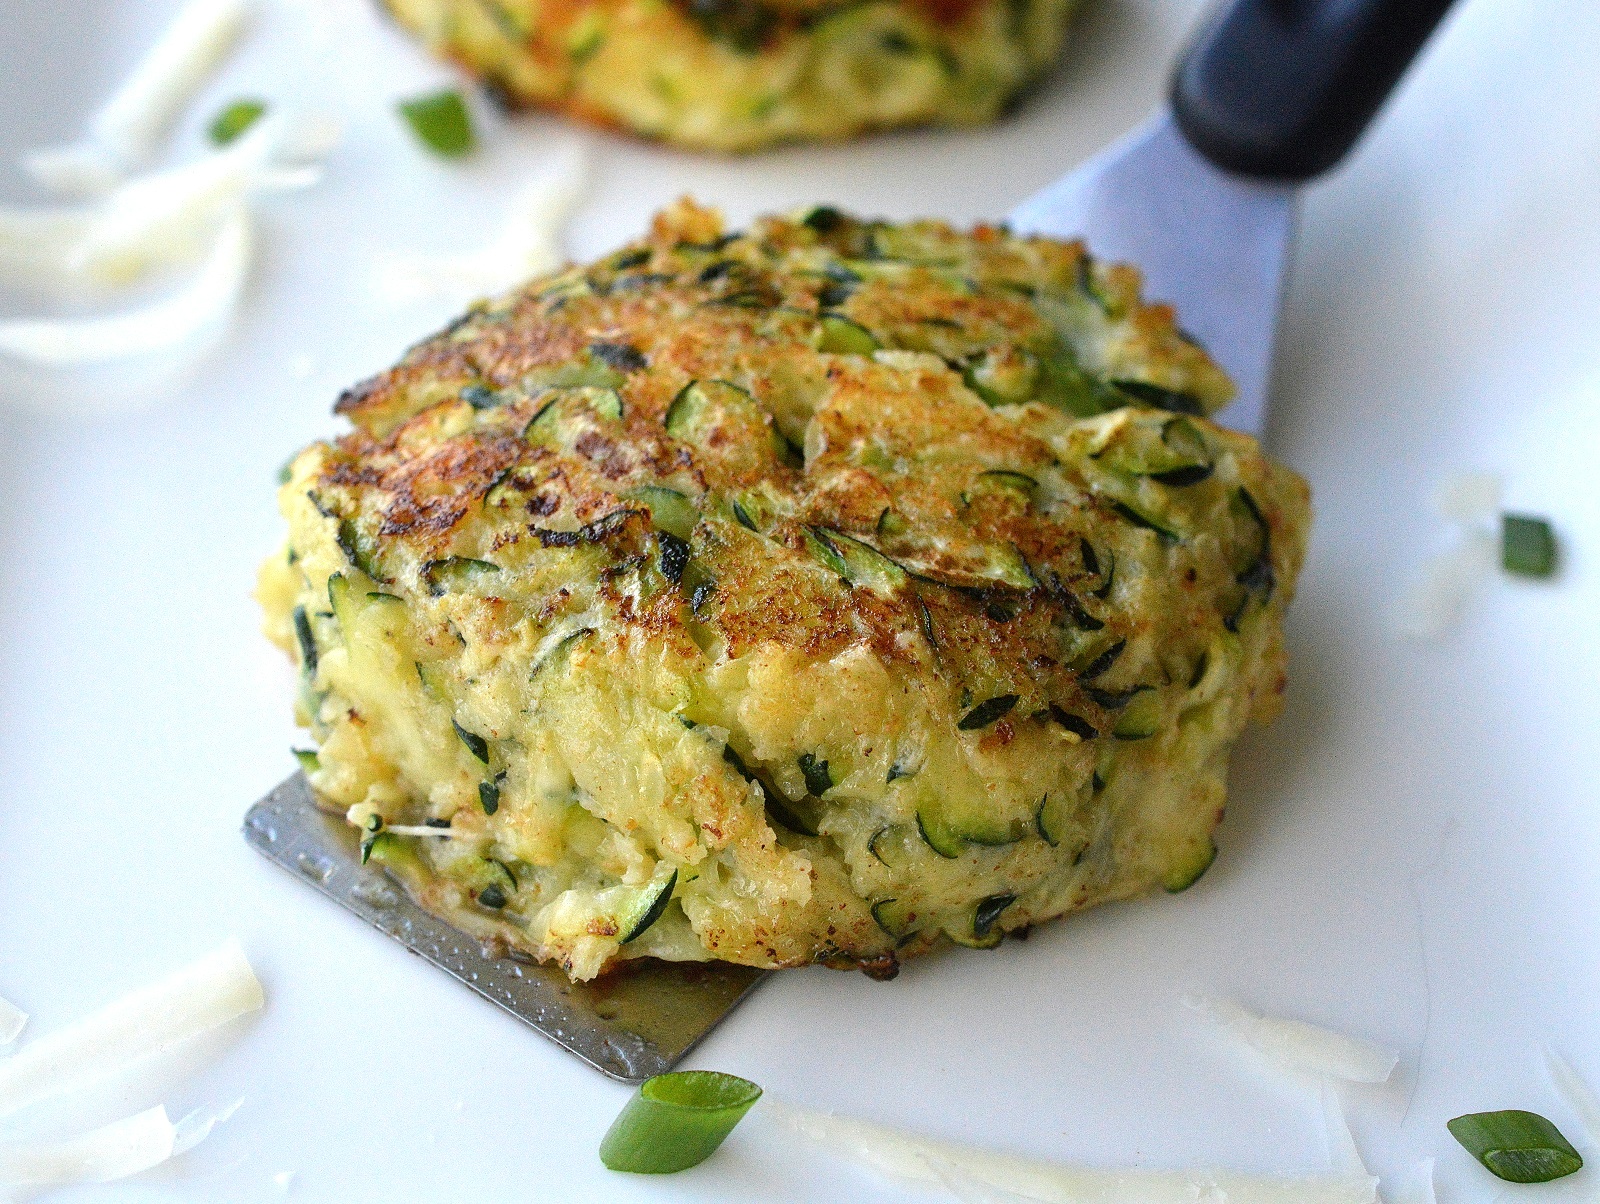 Cheesy Zucchini Cakes are different and delicious! Zucchini Fritter Recipe. Kids like them too!